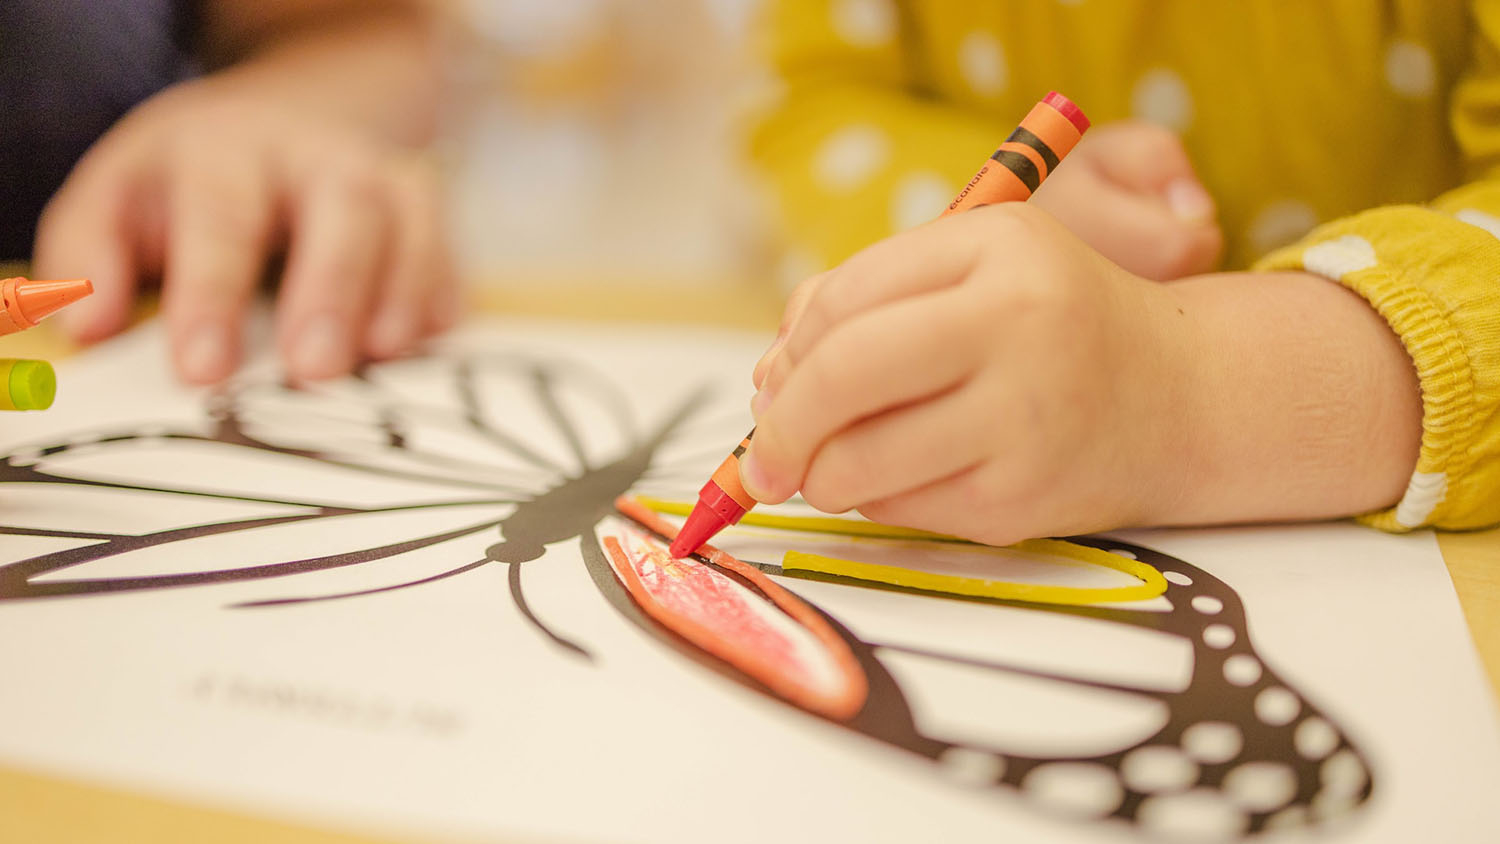 photo shows a toddler's hands. the toddler is using crayons to color in a picture.